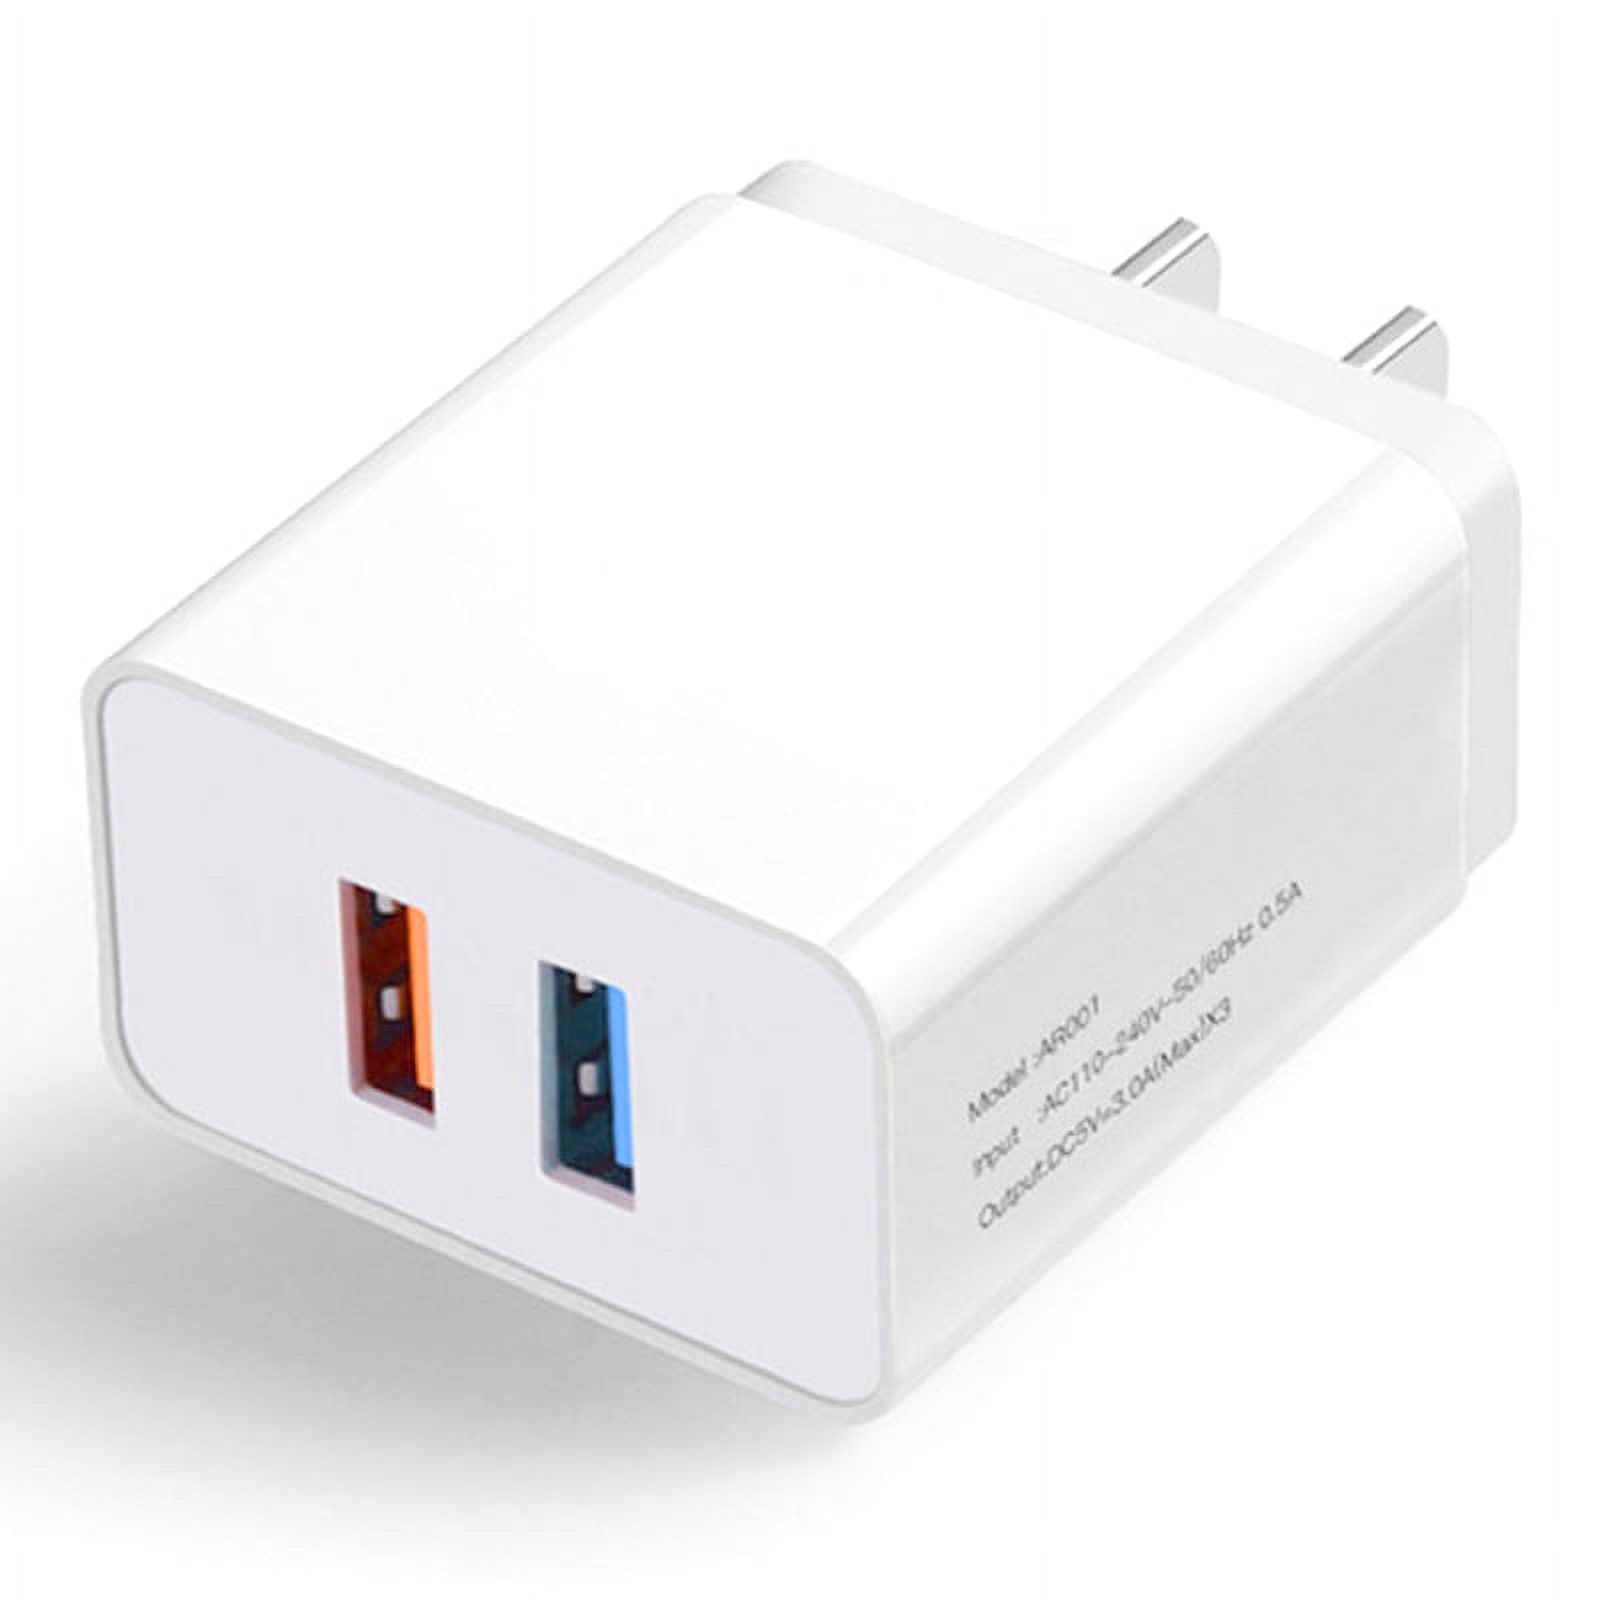 Wall Charger, Upgraded 10W 2-Port USB Plug Cube Portable Wall Charger Plug for iPhone iPad Android Universal for All USB Charging Devices - image 2 of 3